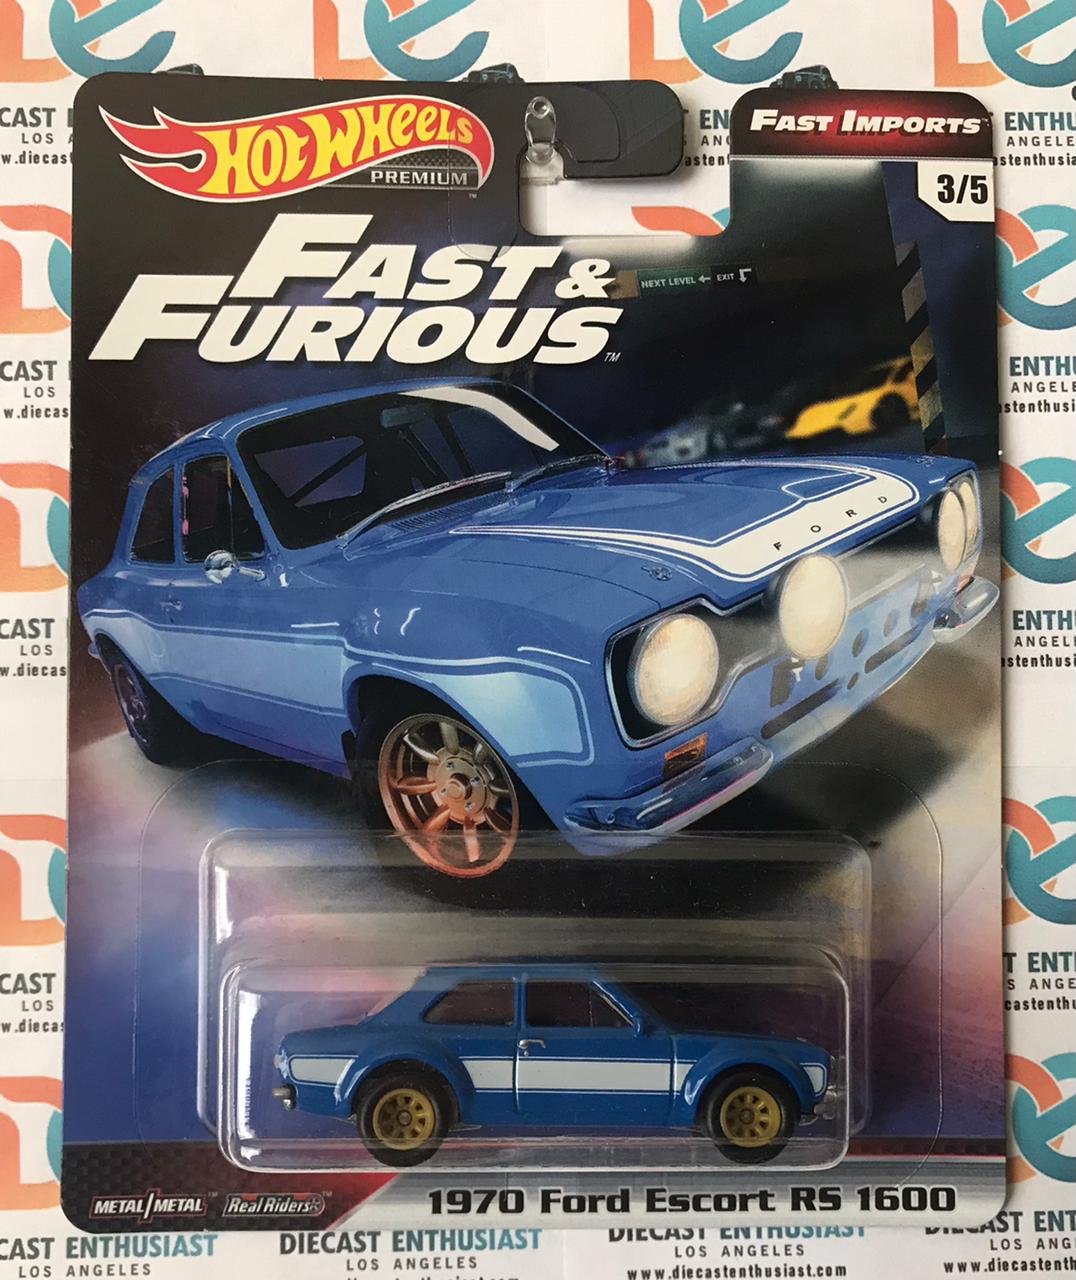 Hot Wheels Fast & Furious Fast Imports 1970 Ford Escort 1:64